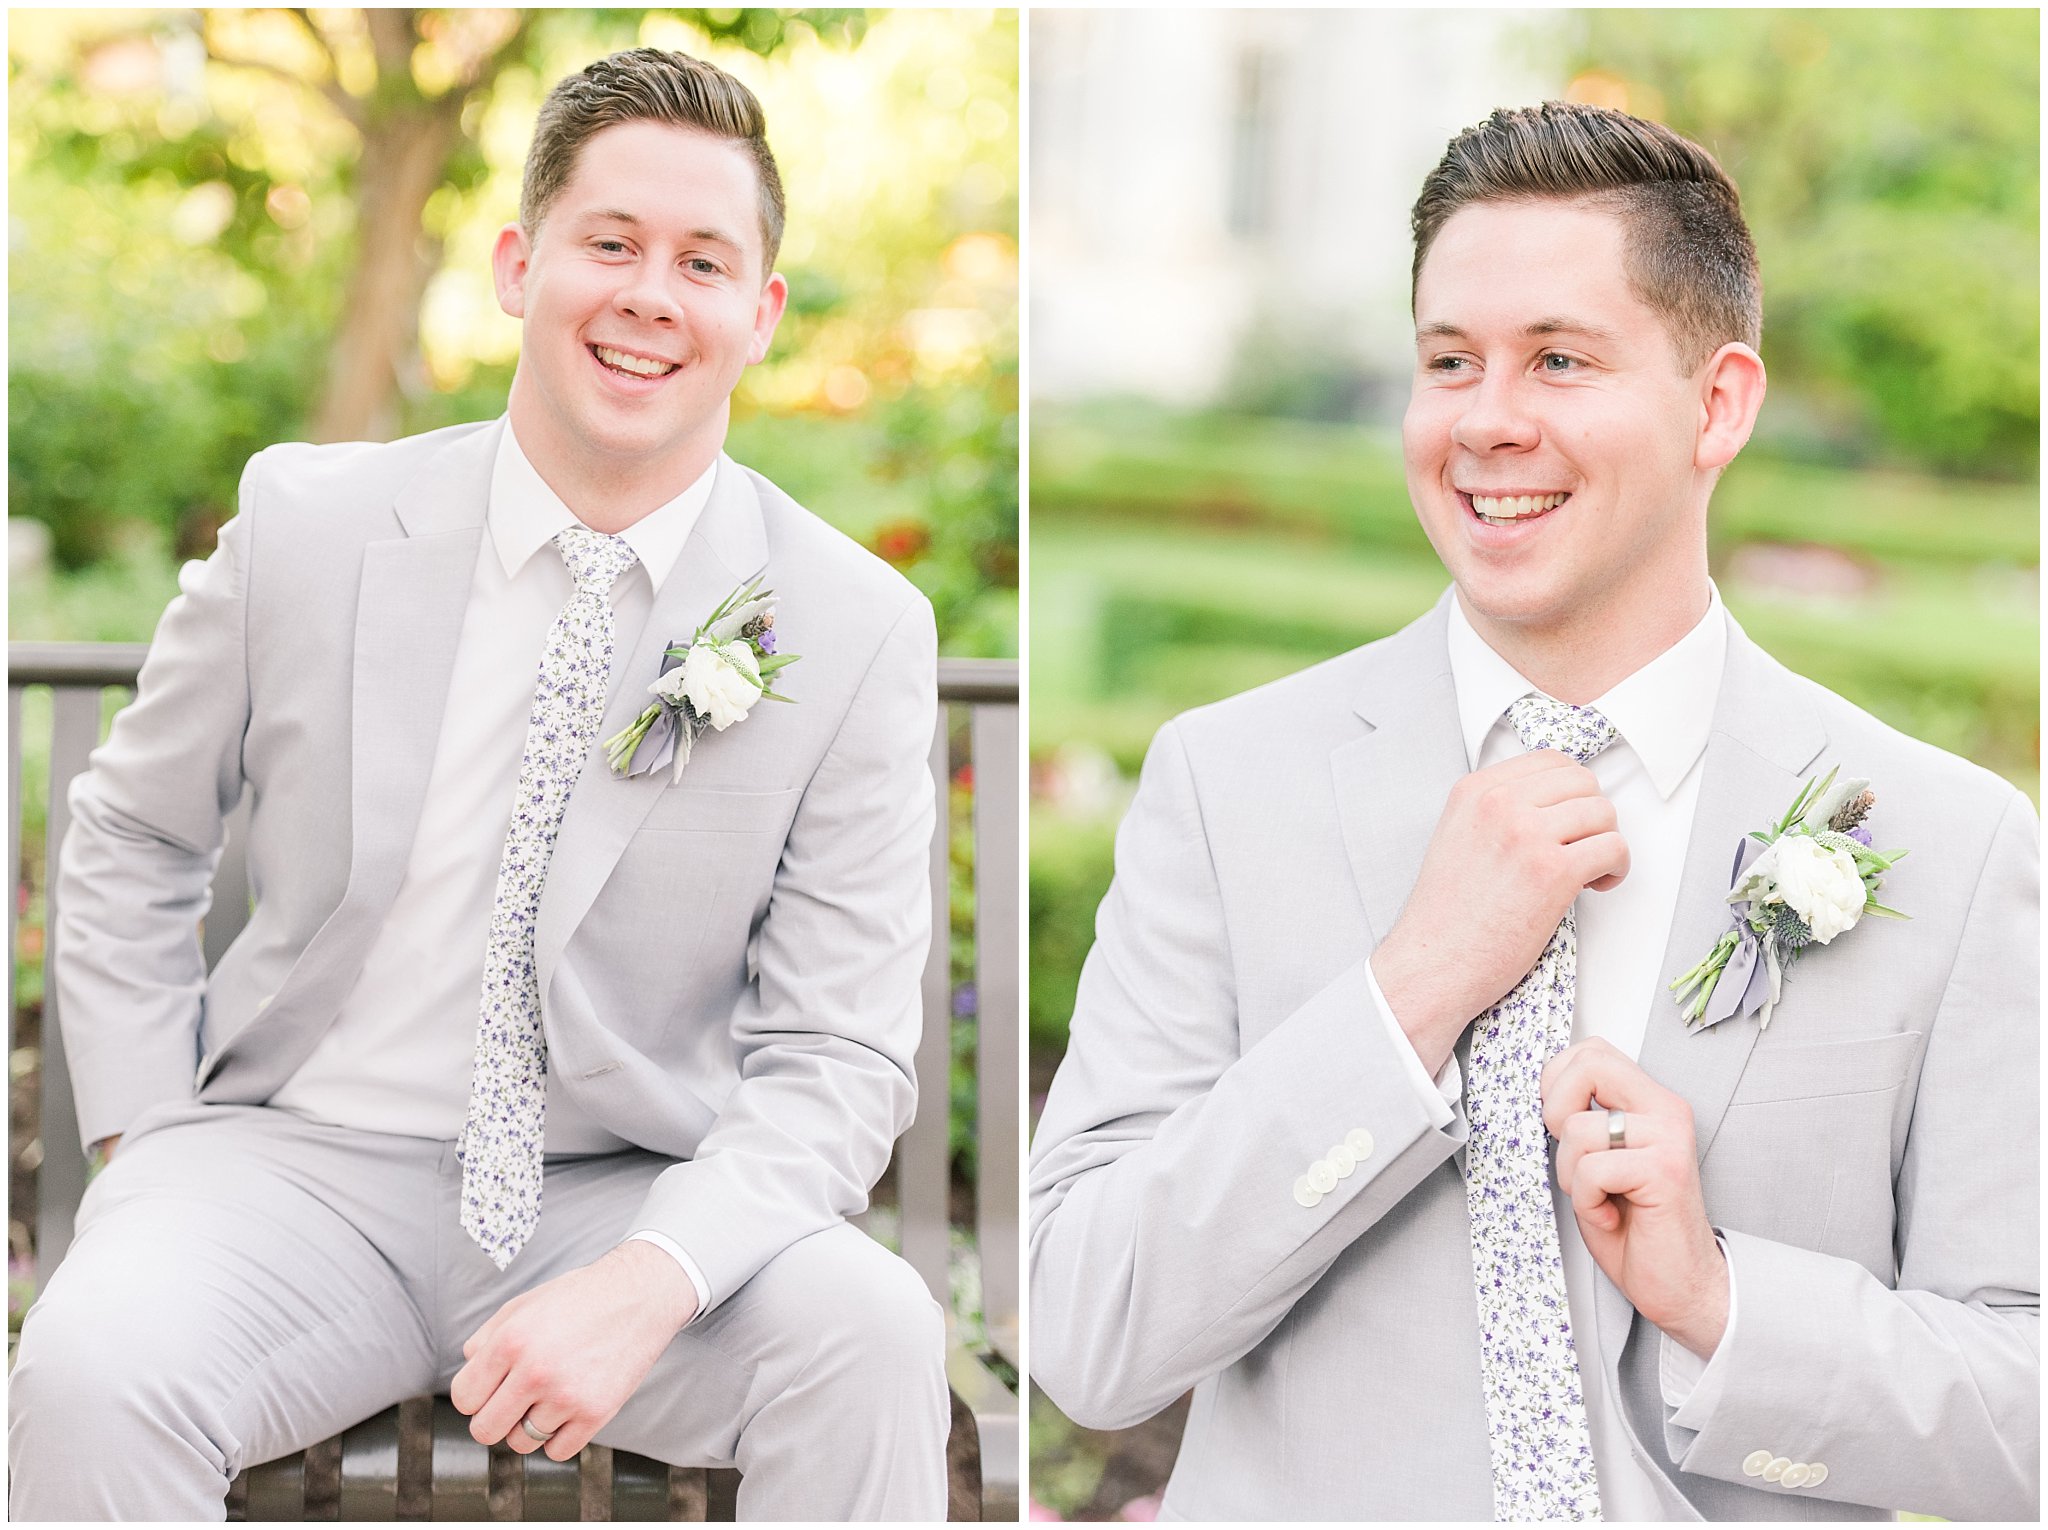 Groom wearing grey suit with lavender floral tie | Elegant formal session at the Salt Lake Temple and Ensign Peak Formal Session | Jessie and Dallin Photography